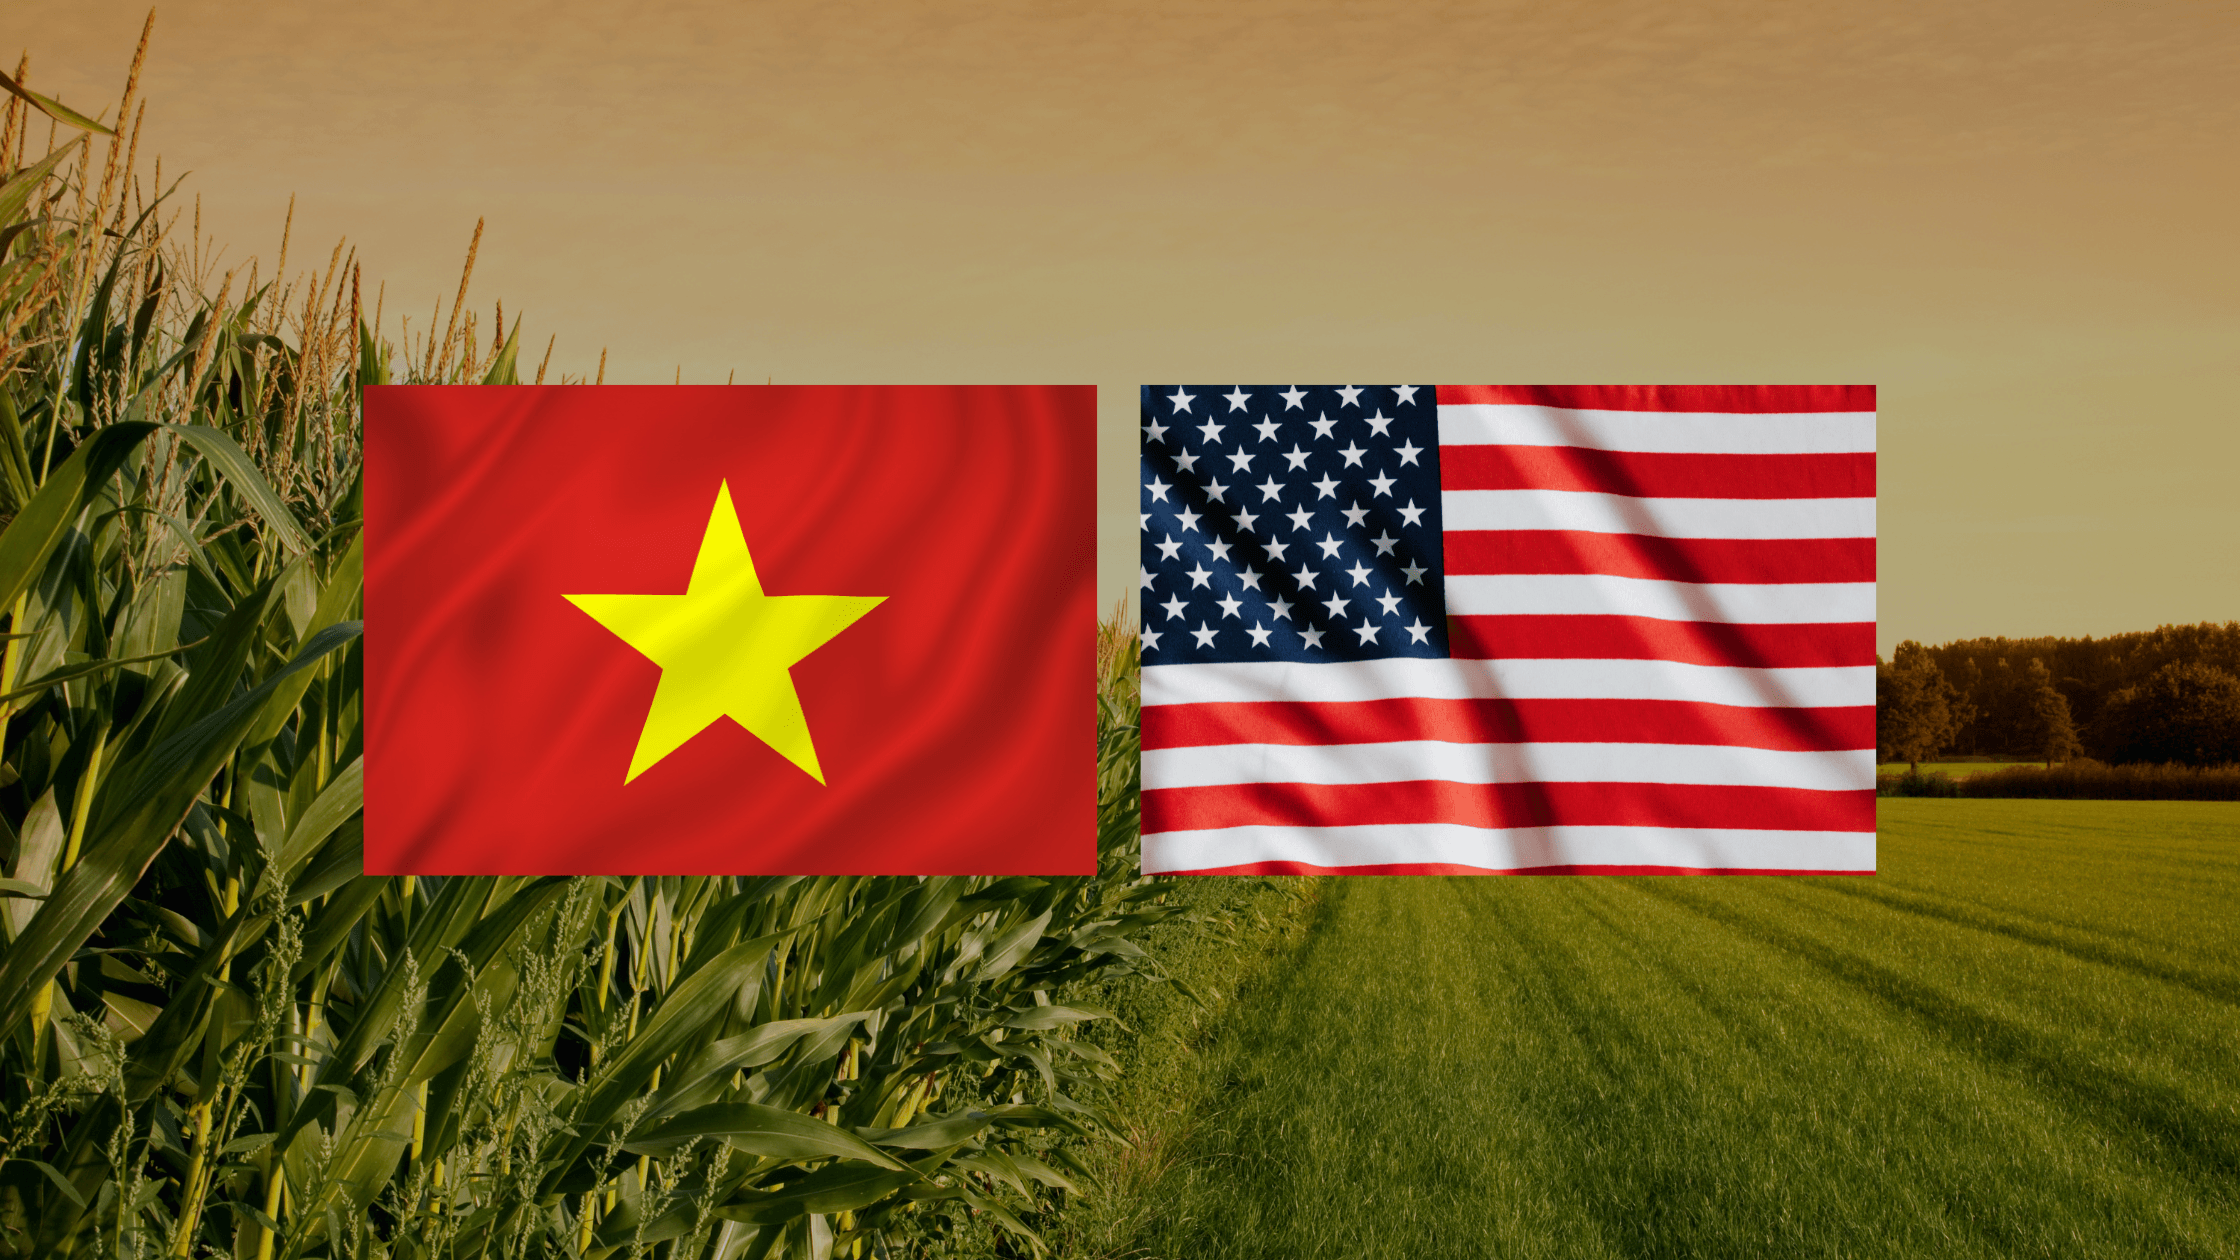 Vietnam and American flag together amongst corn field backdrop